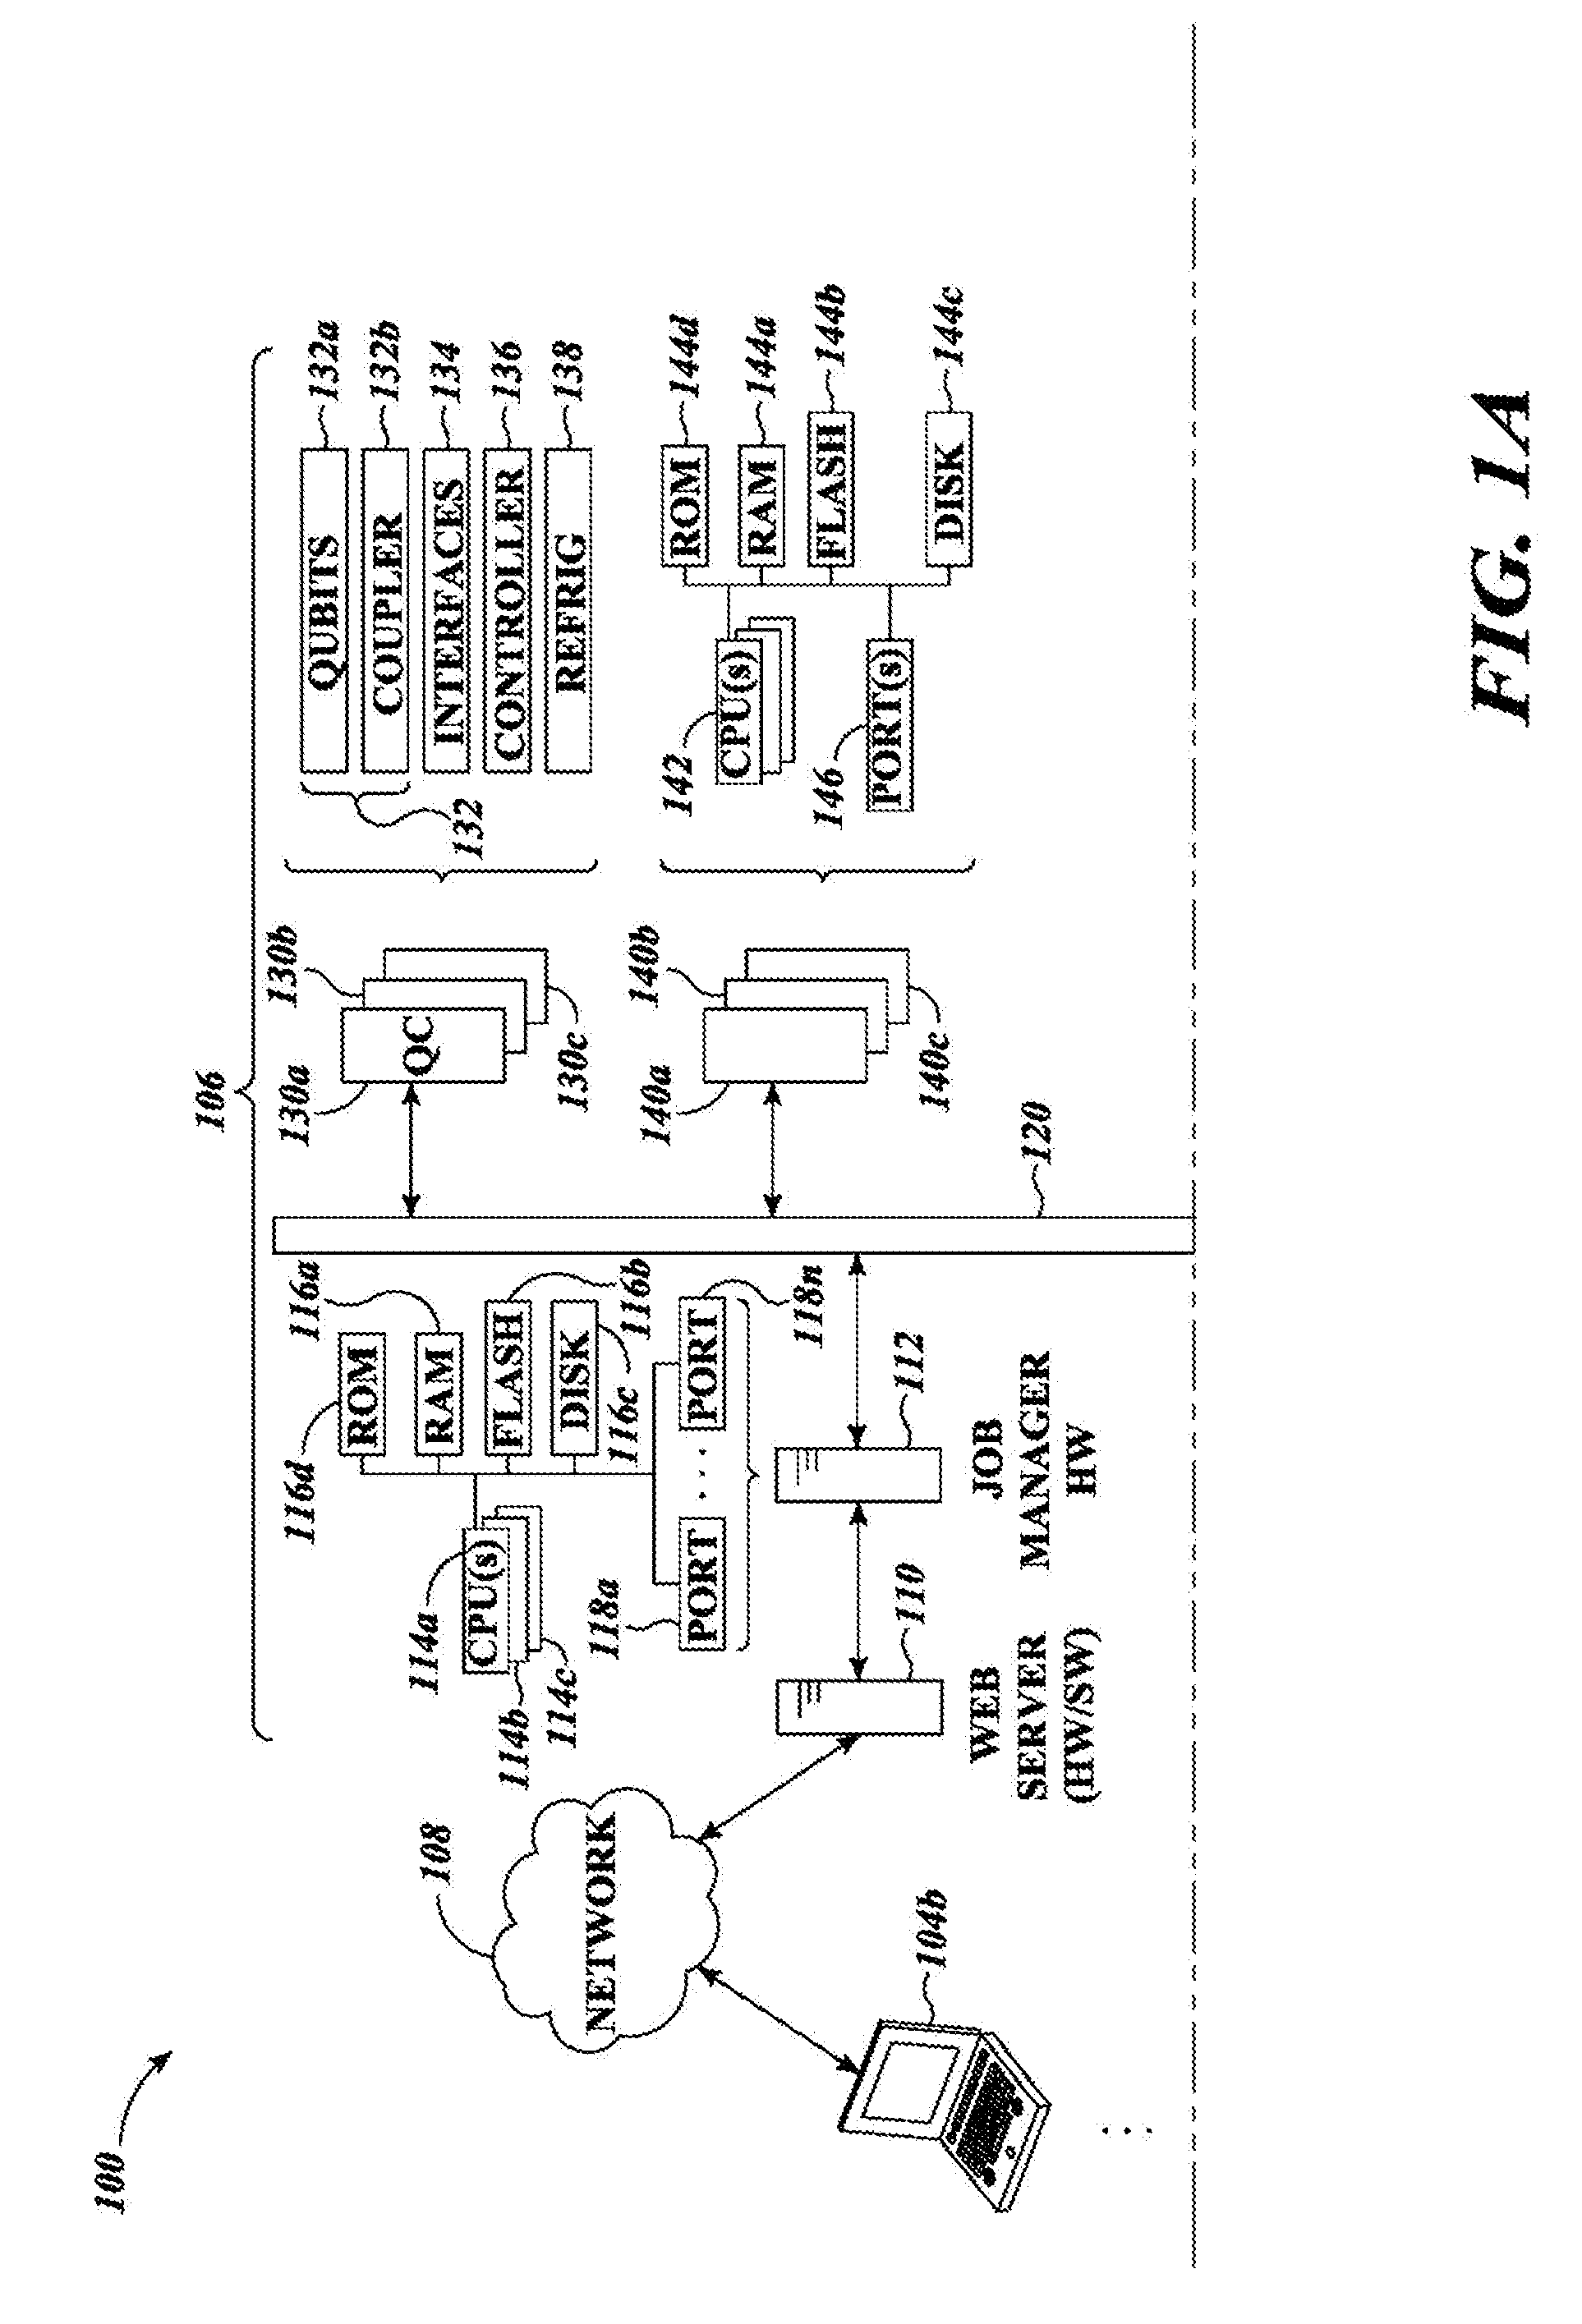 Systems and methods for improving the performance of a quantum processor to reduce intrinsic/control errors